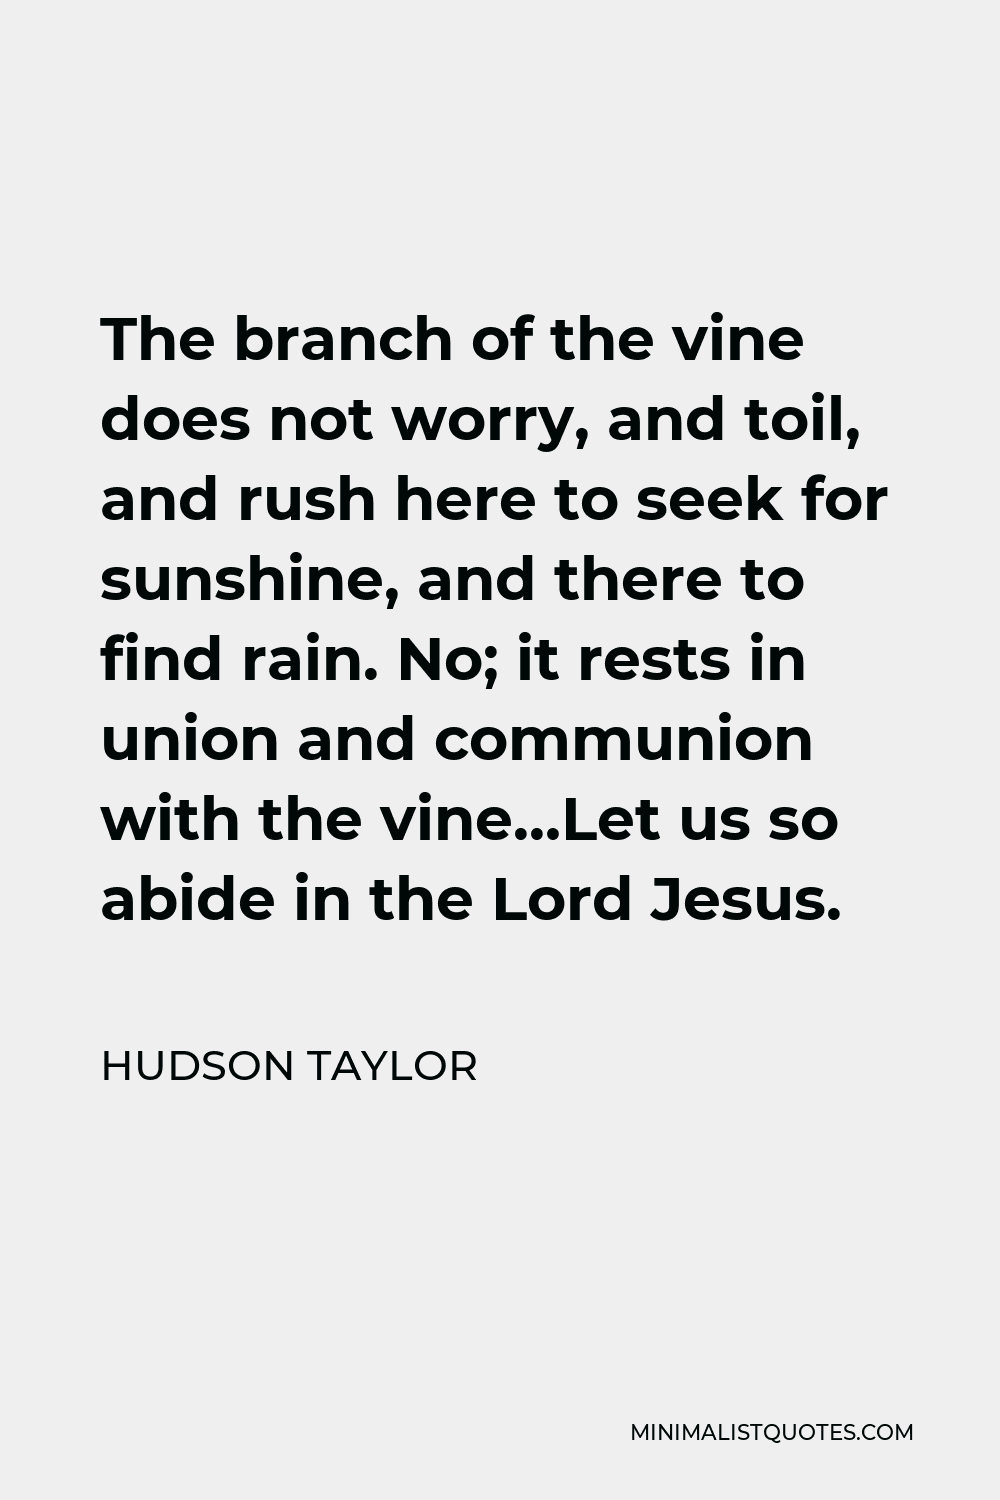 Hudson Taylor Quote - The branch of the vine does not worry, and toil, and rush here to seek for sunshine, and there to find rain. No; it rests in union and communion with the vine…Let us so abide in the Lord Jesus.